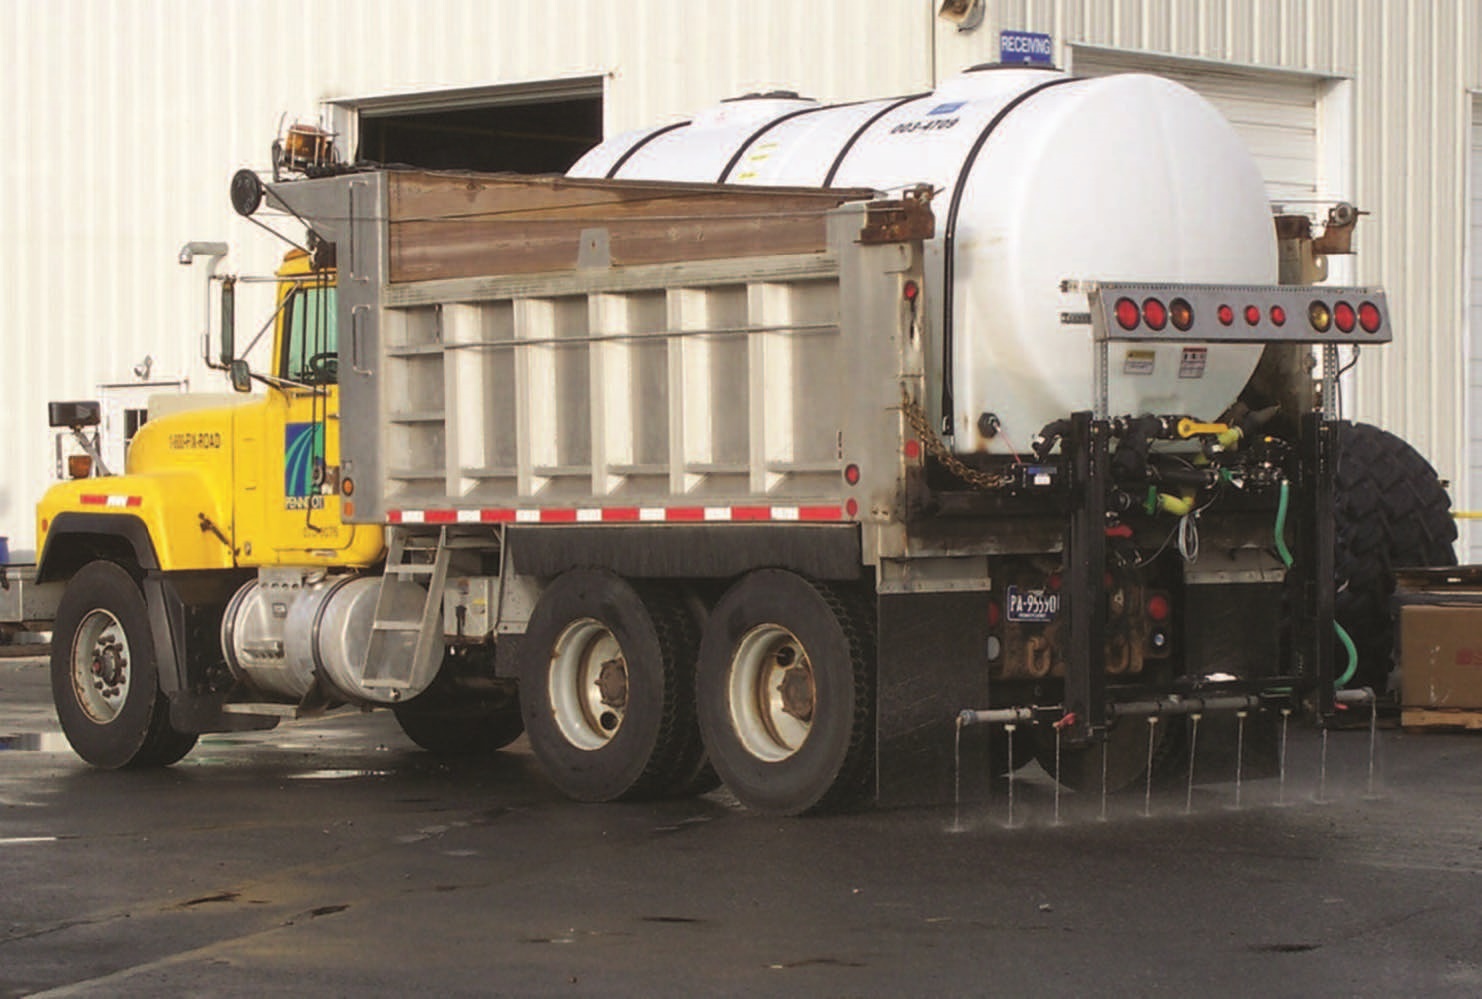 Harmoney Deicing Products - Chicagoland's Leading Supplier of Liquid Deicers  and Salt Brine for Anti-Icing